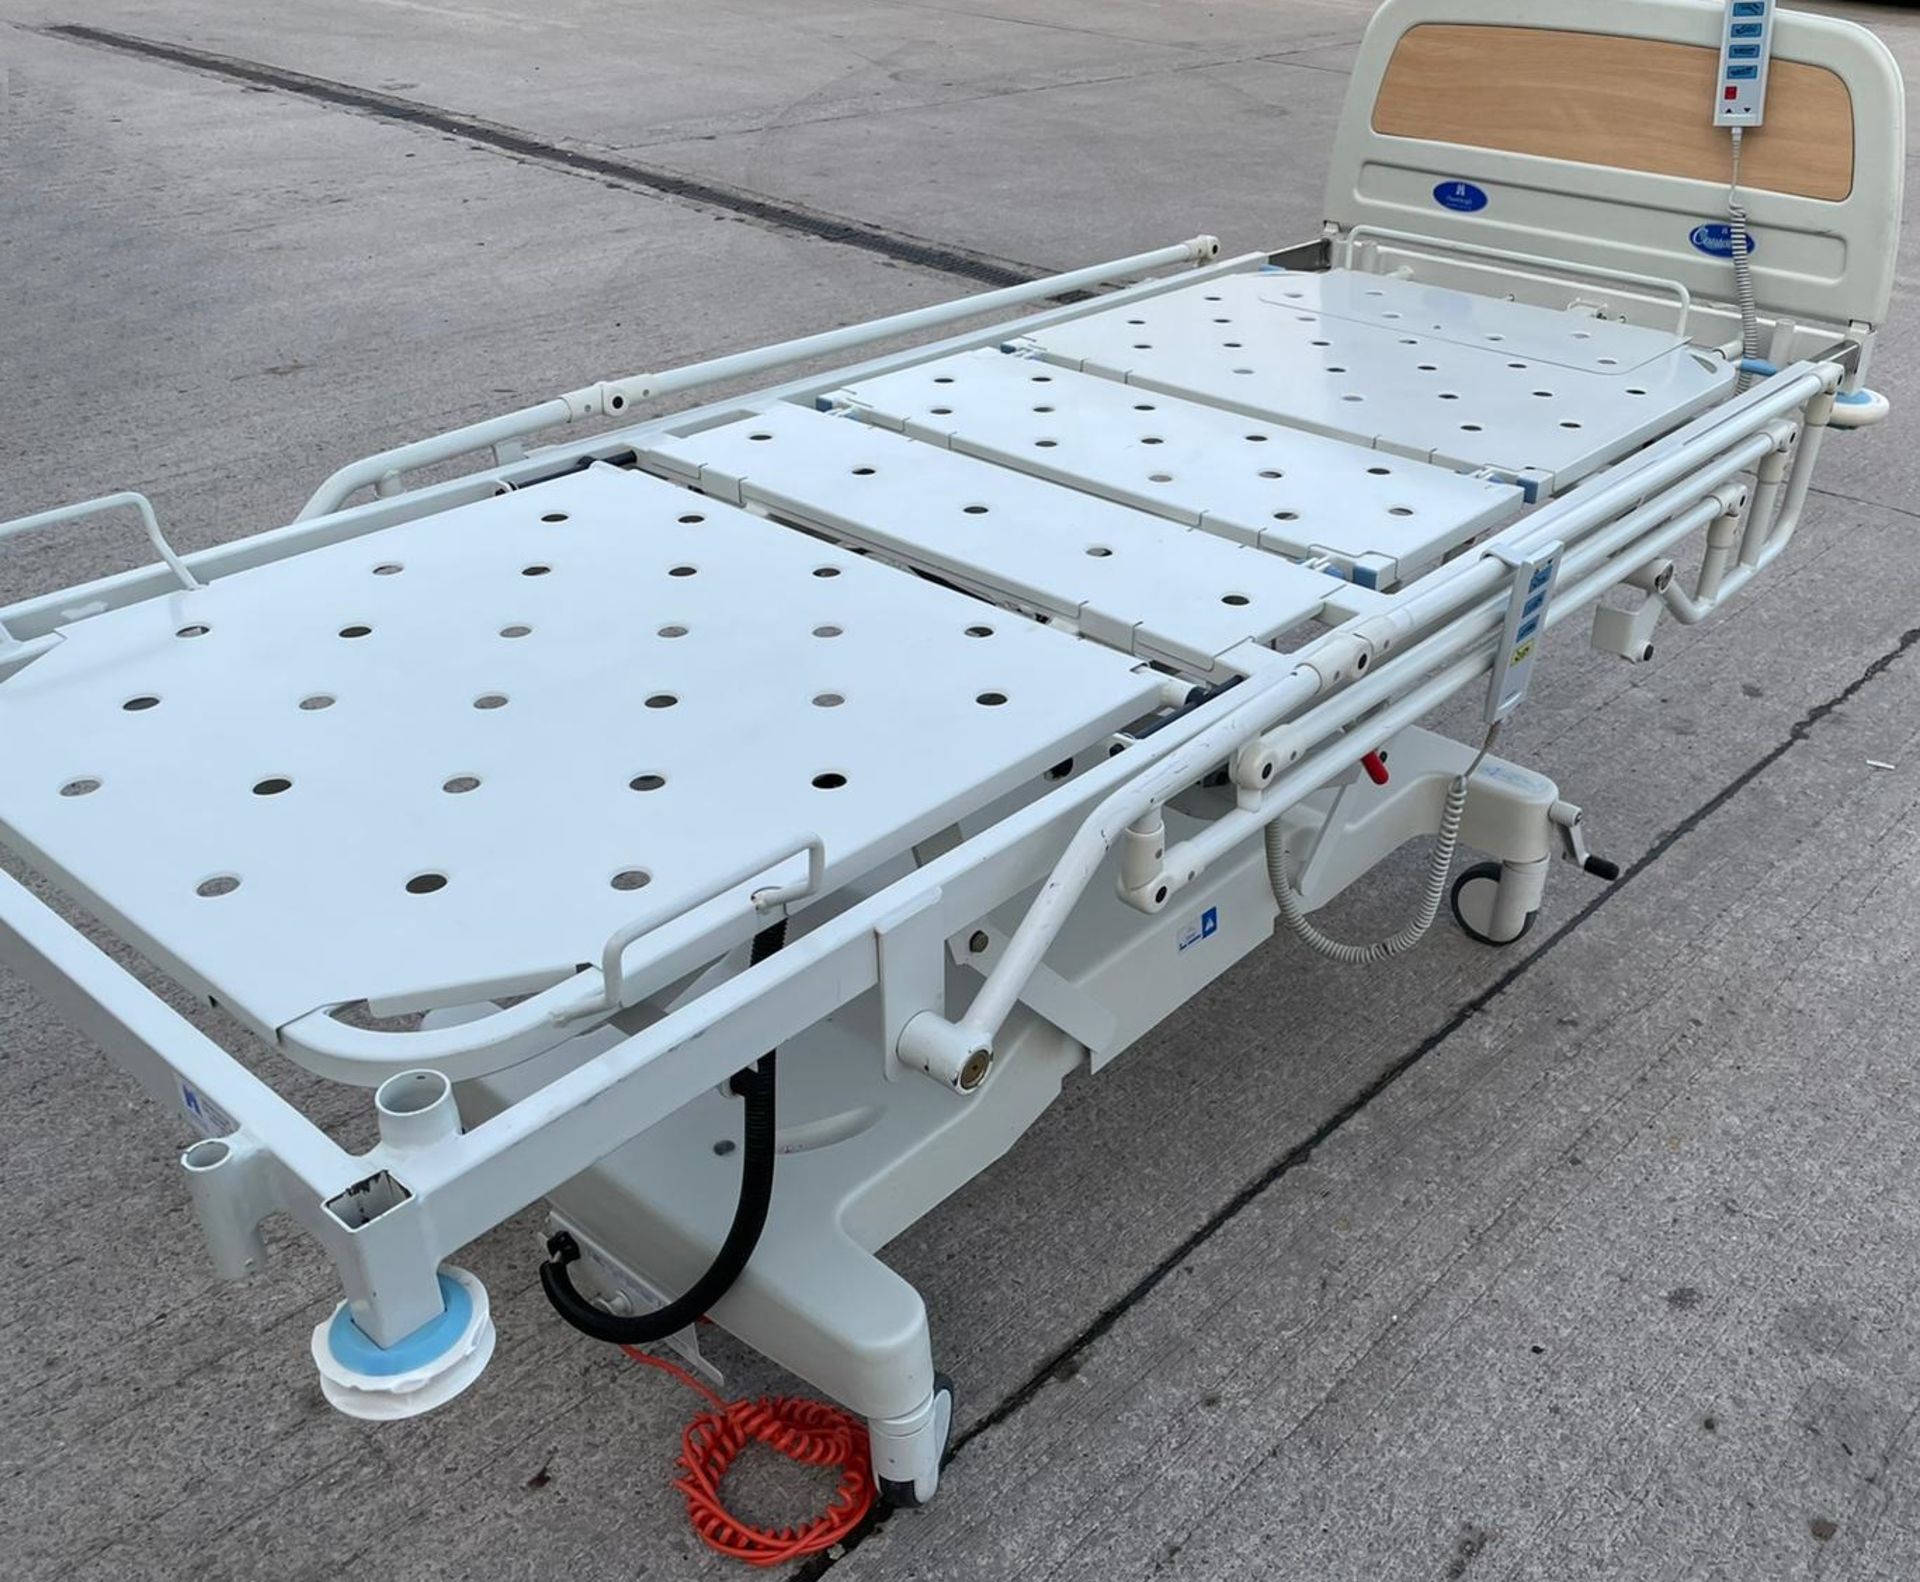 1 x Huntleigh CONTOURA Electric Hospital Bed - Features Rise/Fall 3-Way Profiling, Side Rails, - Image 6 of 16